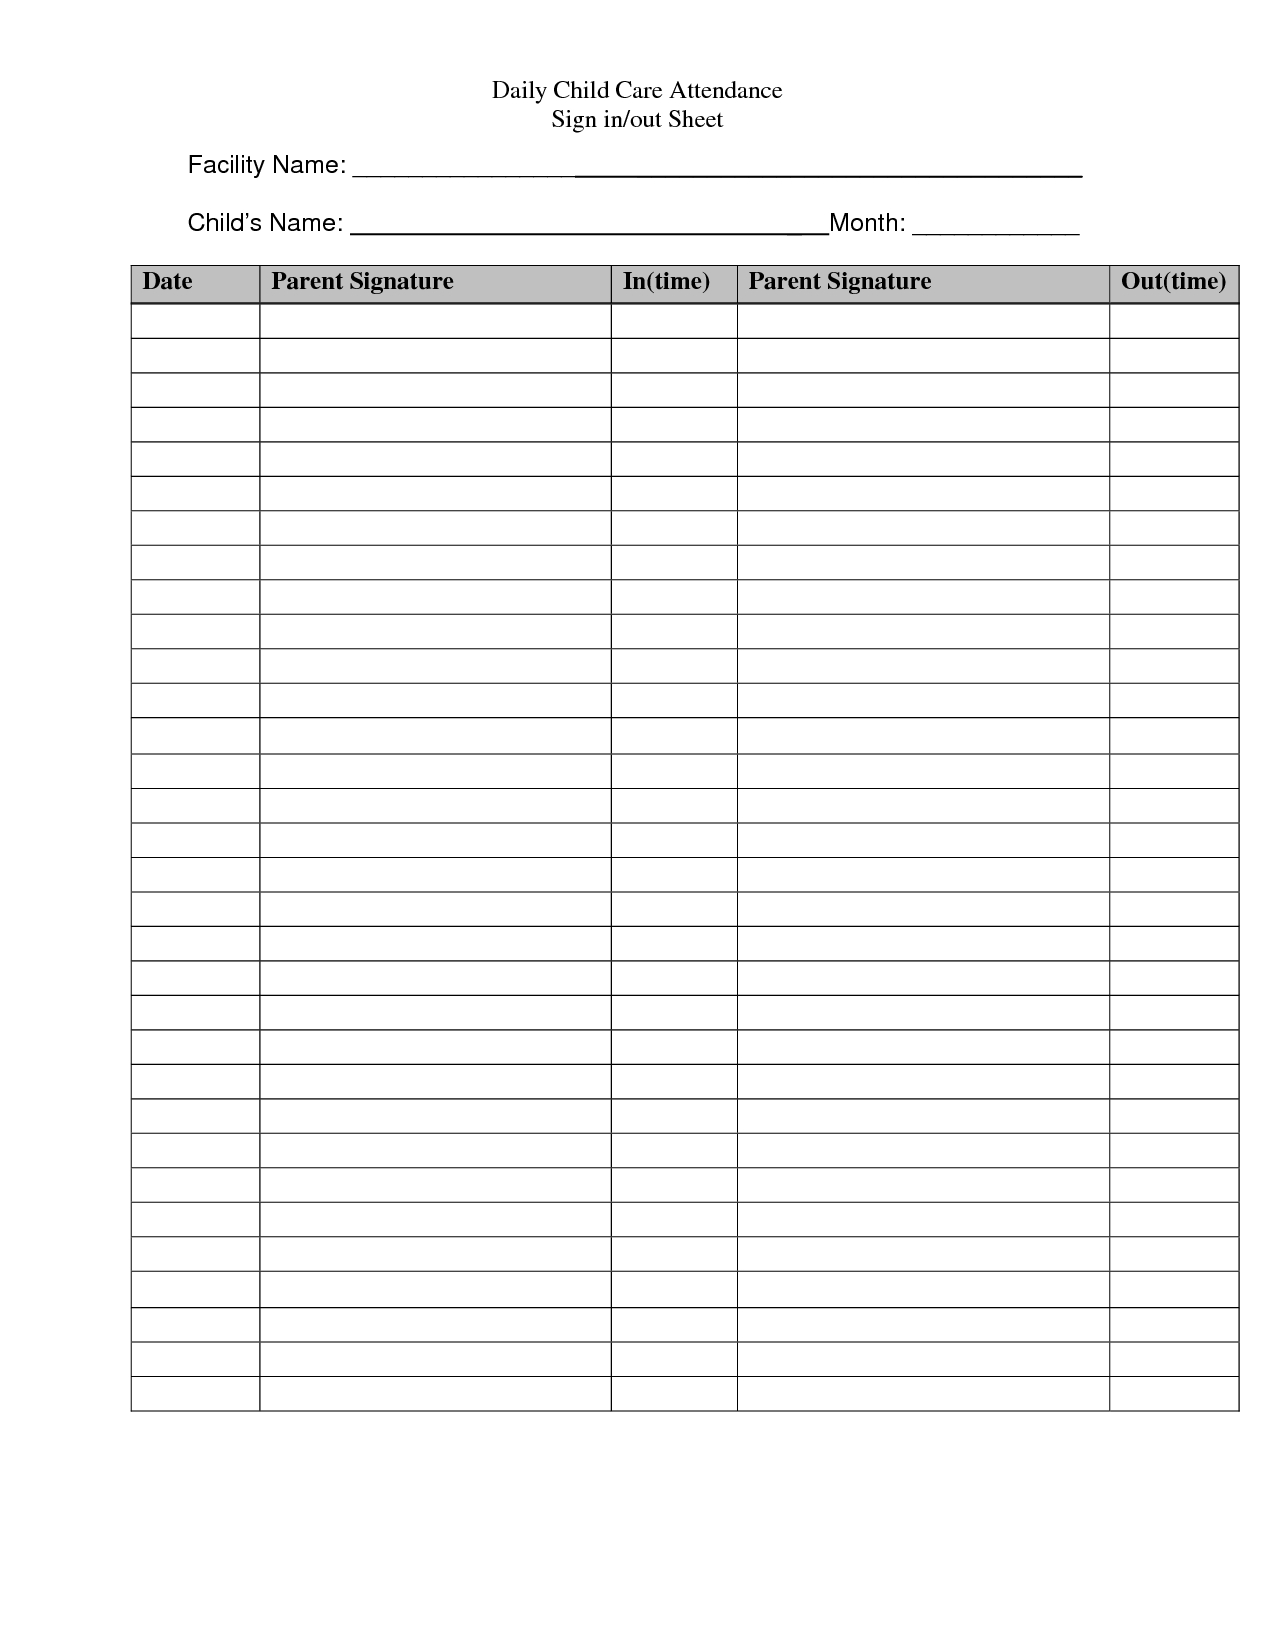 Templates That Are Free For Daycare Signs | Daily Child Care  Day Care Payment Spreadsheet